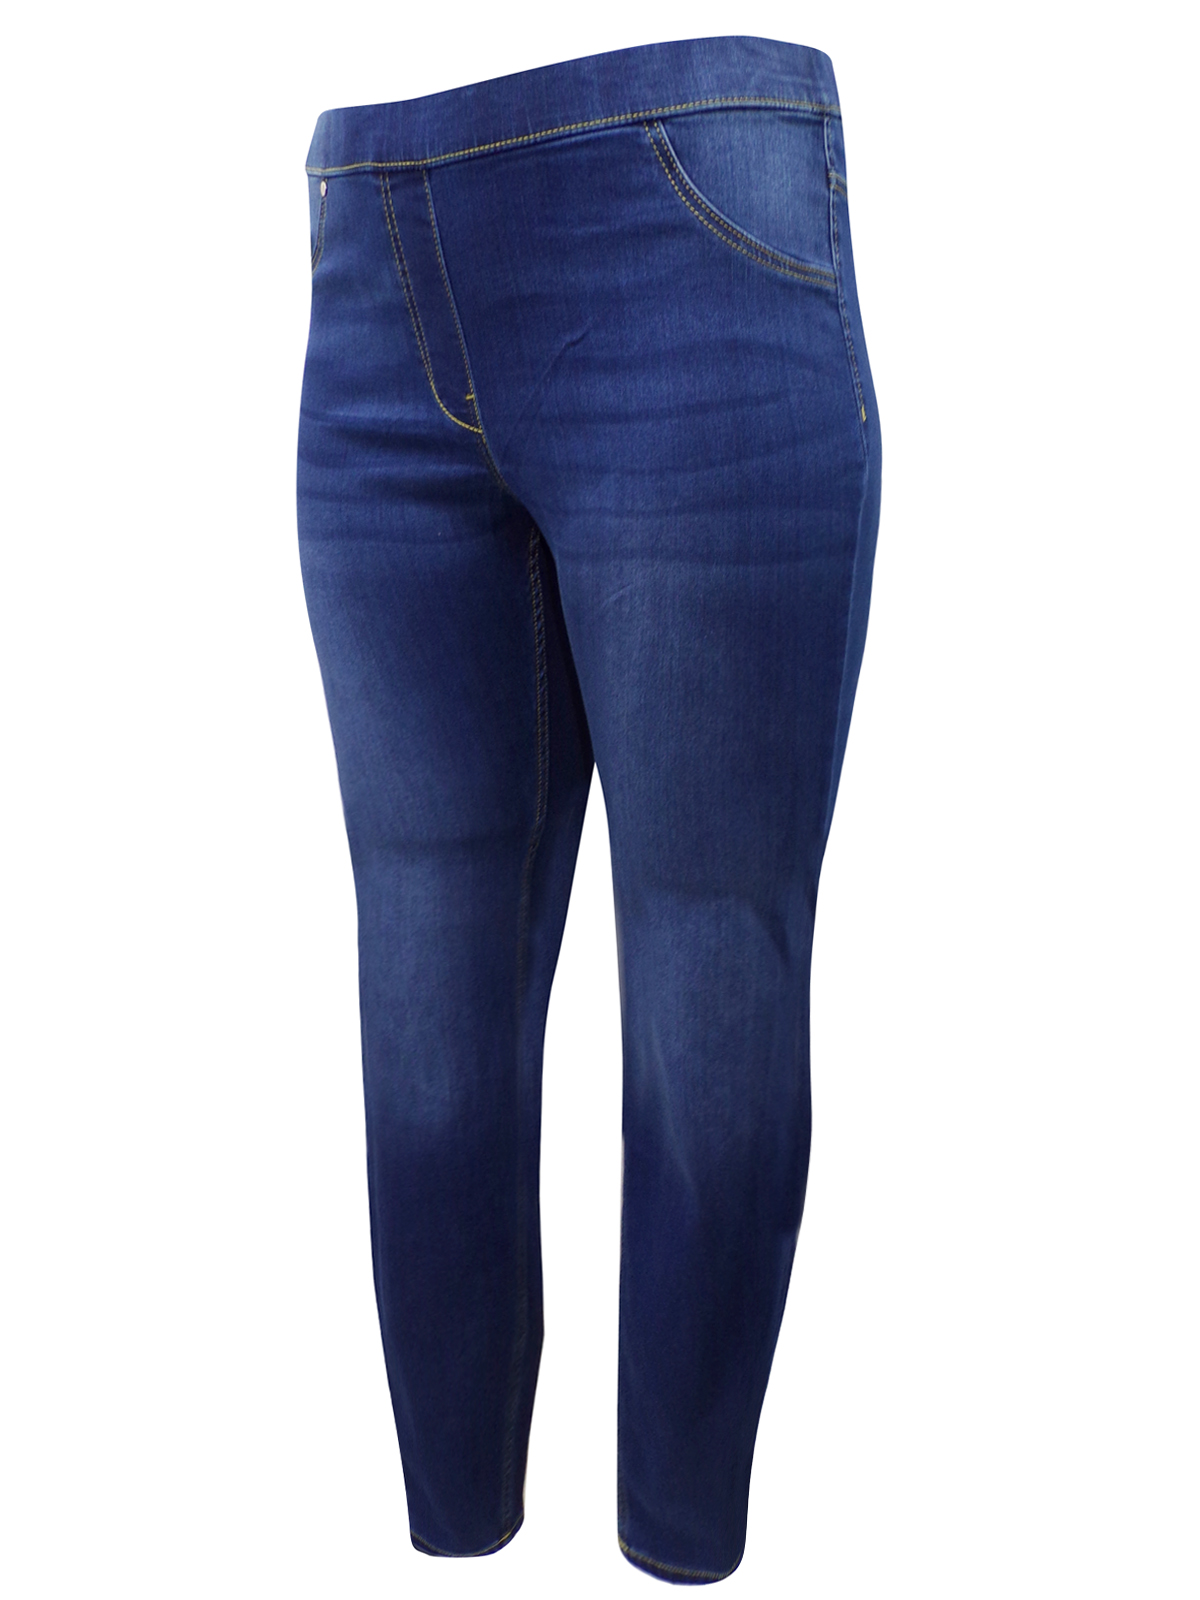 H&M DENIM Skinny Fit Pull On Jeggings - Plus Size 16 to 26